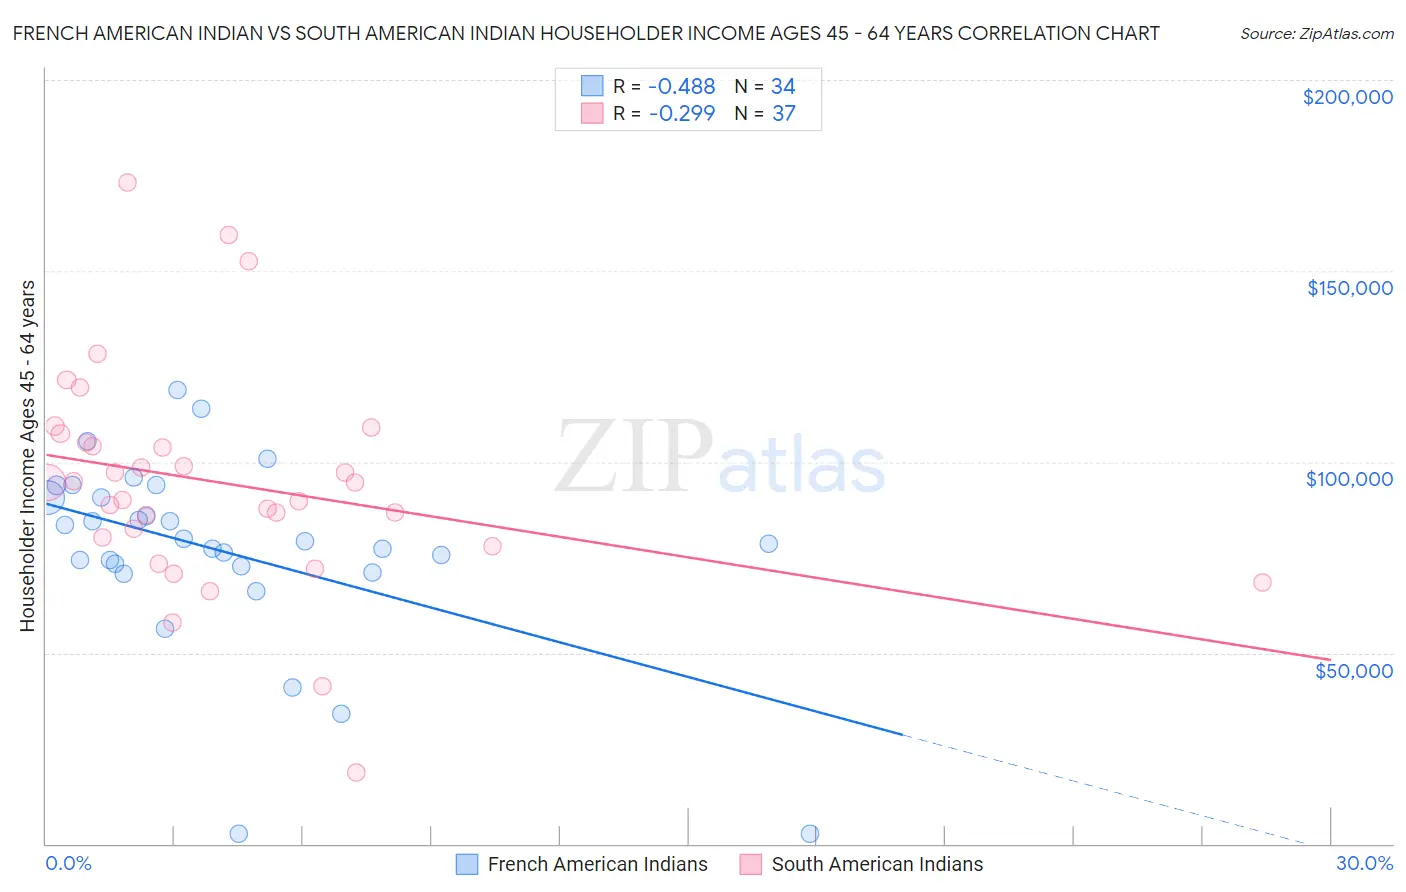 French American Indian vs South American Indian Householder Income Ages 45 - 64 years